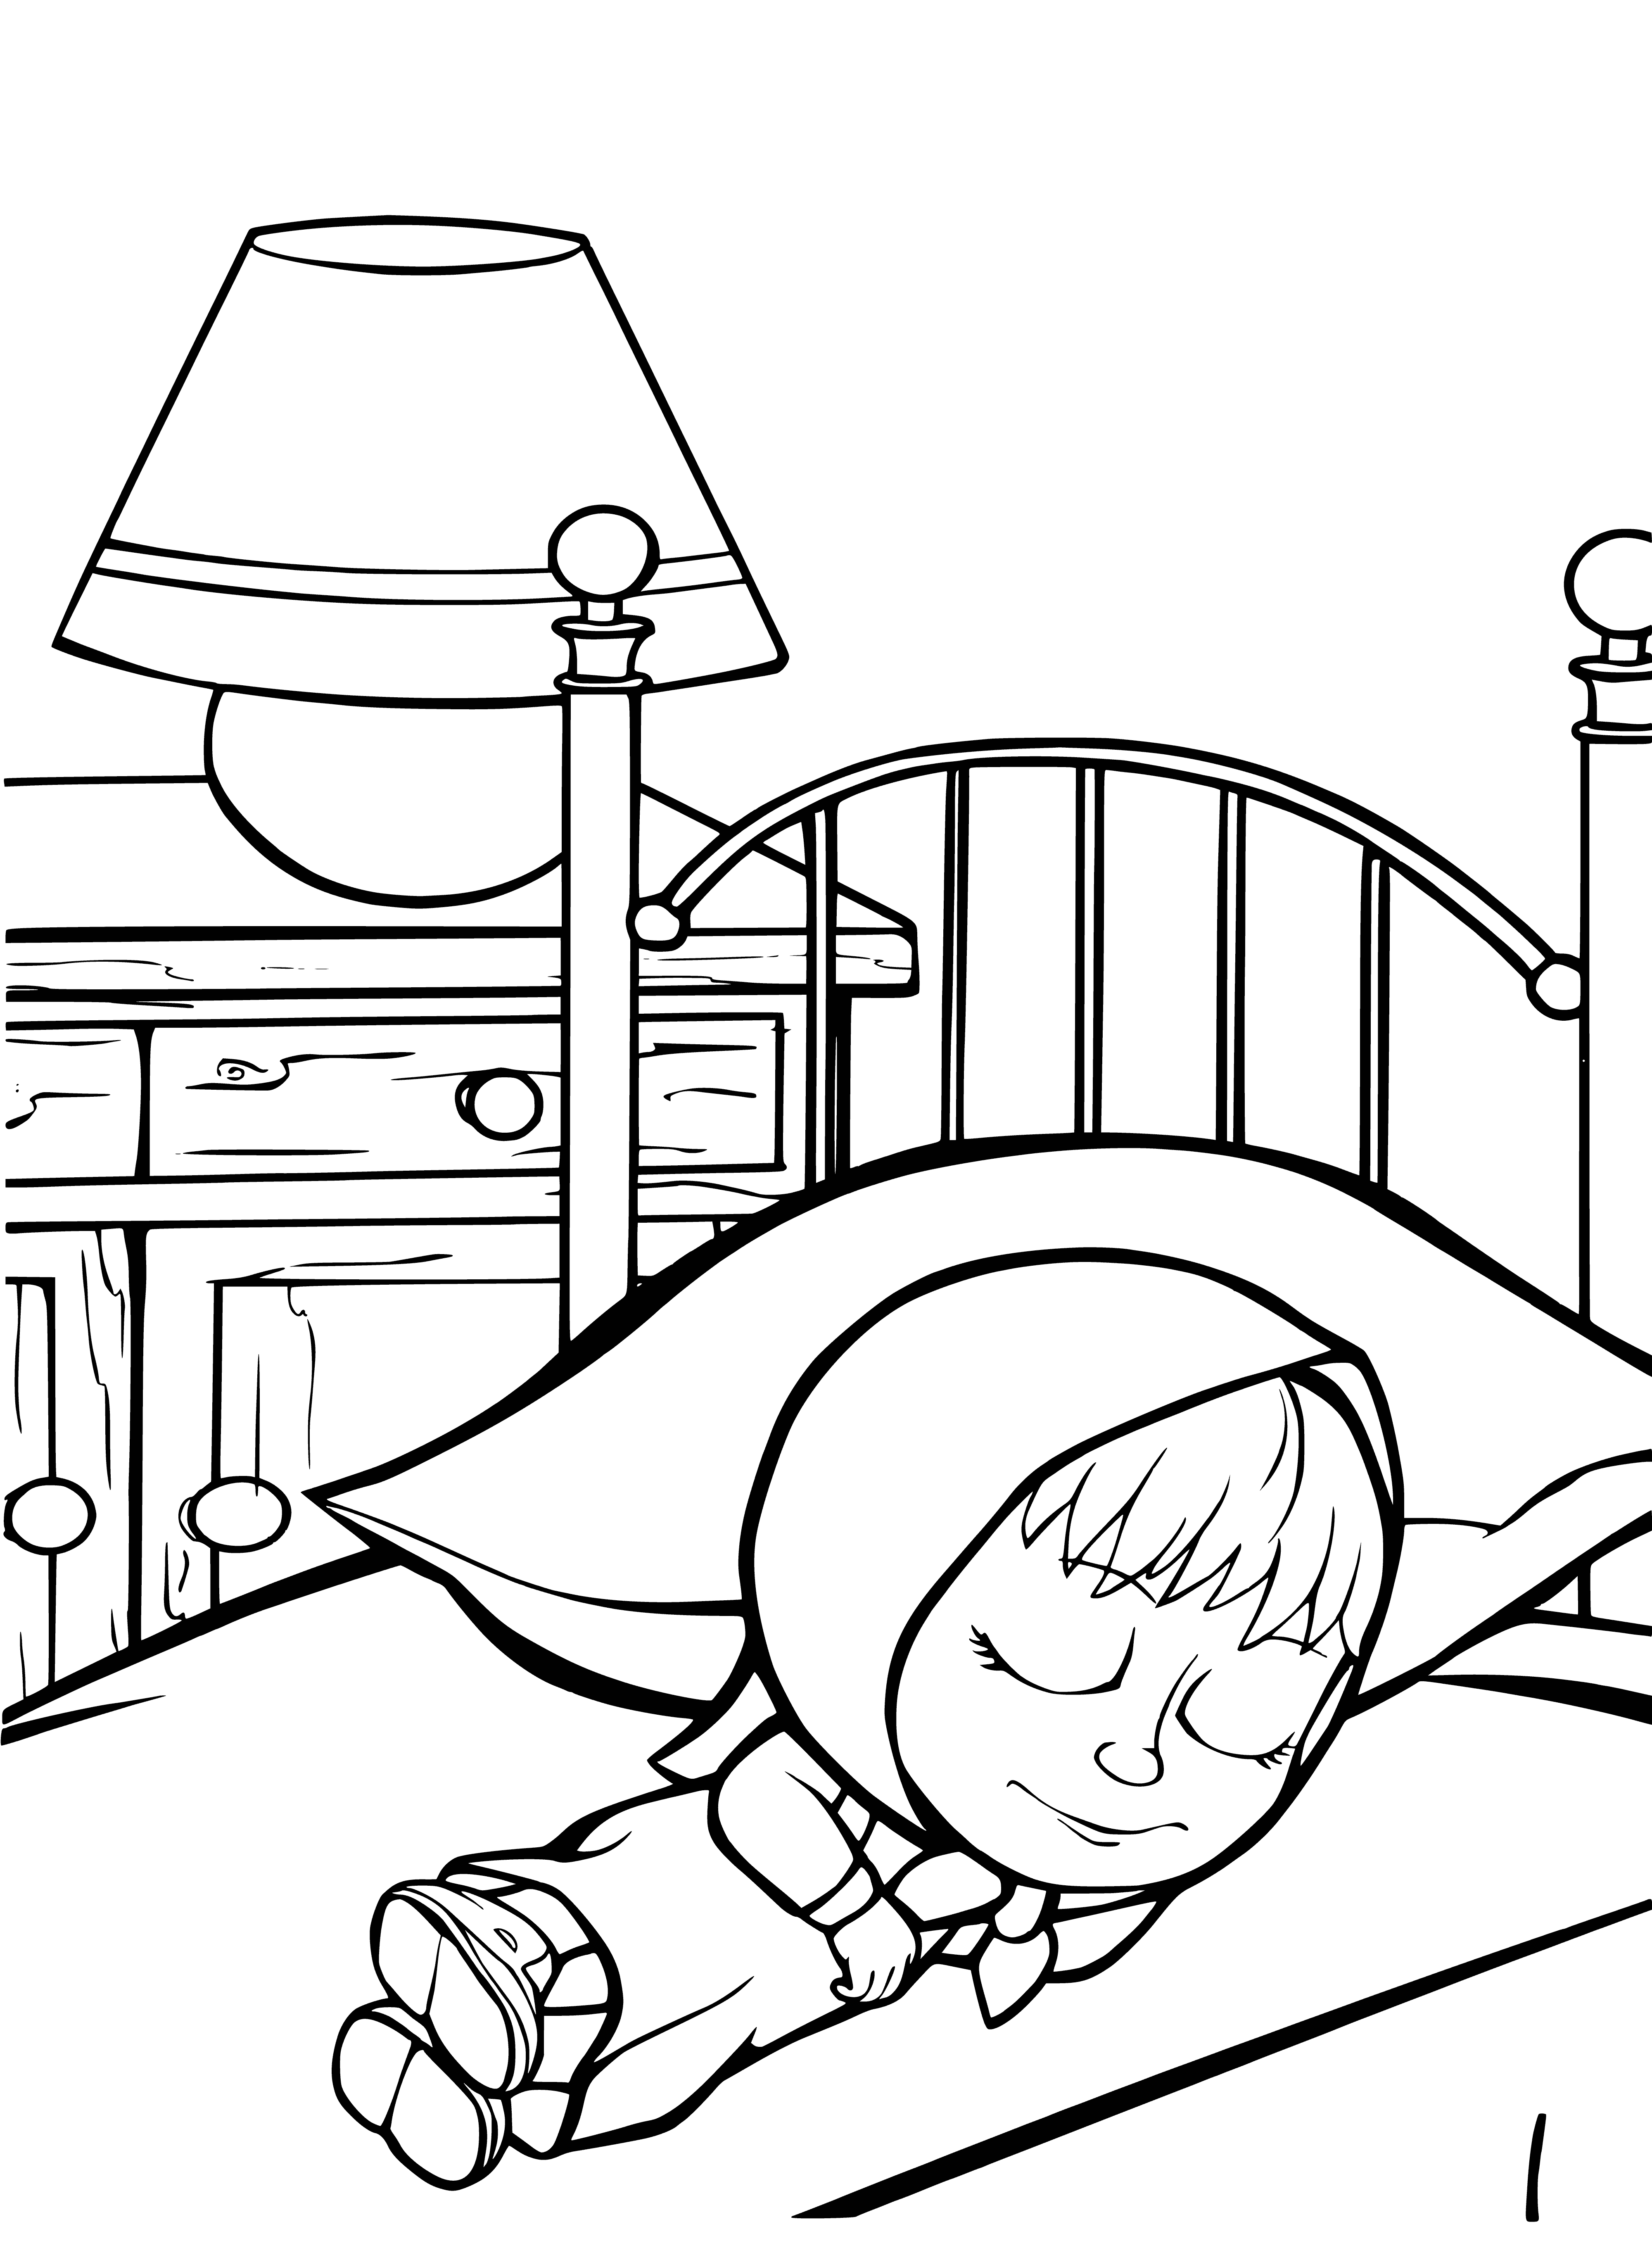 coloring page: Masha sleeps soundly cuddled close to her teddy bear, peaceful and content.